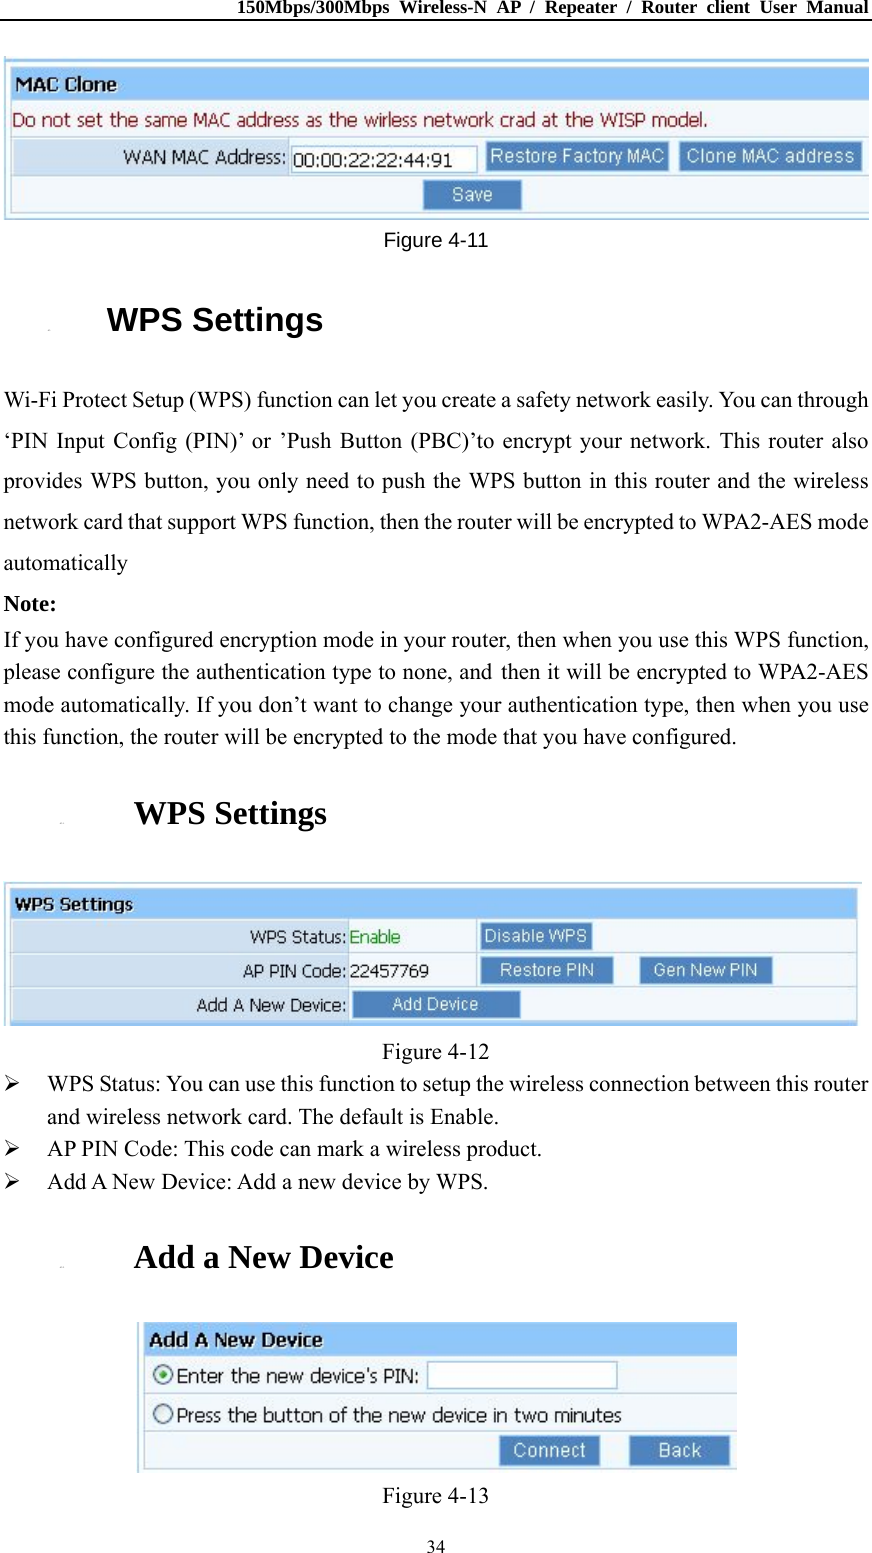 150Mbps/300Mbps Wireless-N AP / Repeater / Router client User Manual  34 Figure 4-11 4.3. WPS Settings Wi-Fi Protect Setup (WPS) function can let you create a safety network easily. You can through ‘PIN Input Config (PIN)’ or ’Push Button (PBC)’to encrypt your network. This router also provides WPS button, you only need to push the WPS button in this router and the wireless network card that support WPS function, then the router will be encrypted to WPA2-AES mode automatically Note: If you have configured encryption mode in your router, then when you use this WPS function, please configure the authentication type to none, and then it will be encrypted to WPA2-AES mode automatically. If you don’t want to change your authentication type, then when you use this function, the router will be encrypted to the mode that you have configured. 4.3.1. WPS Settings  Figure 4-12  WPS Status: You can use this function to setup the wireless connection between this router and wireless network card. The default is Enable.  AP PIN Code: This code can mark a wireless product.  Add A New Device: Add a new device by WPS. 4.3.2. Add a New Device  Figure 4-13 